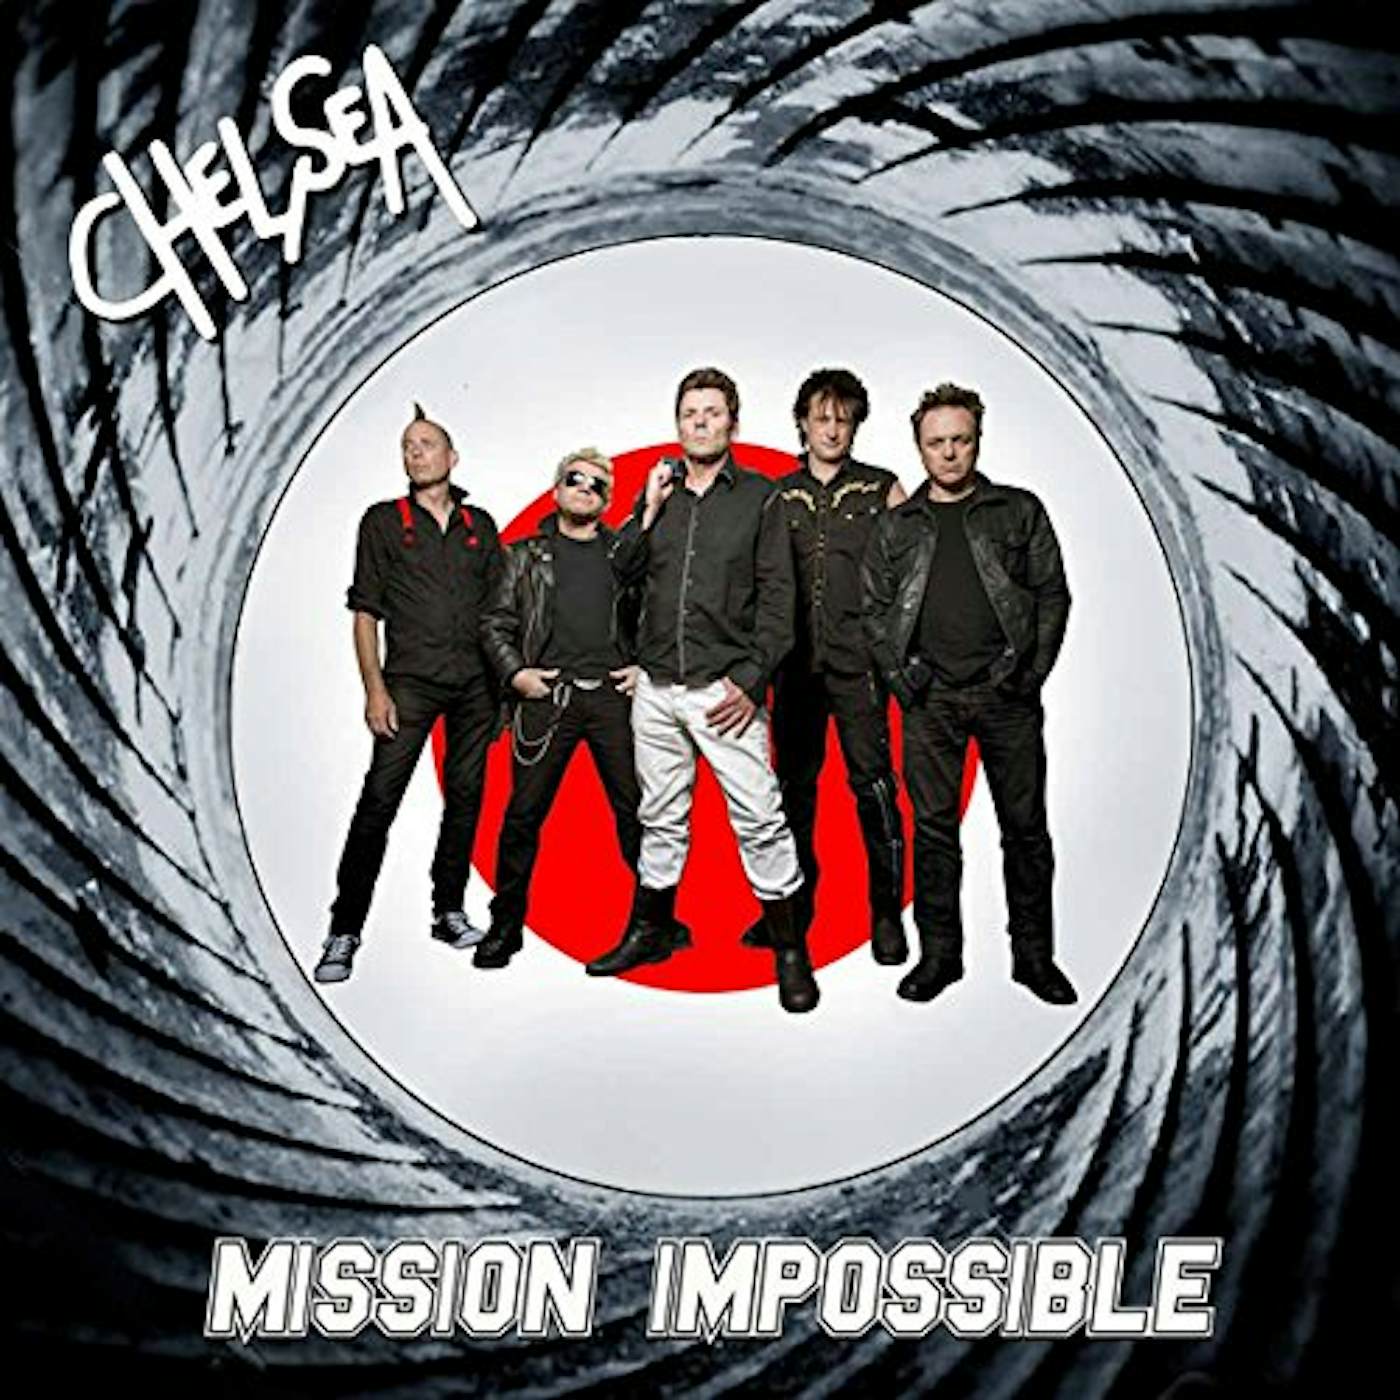 Chelsea MISSION IMPOSSIBLE CD